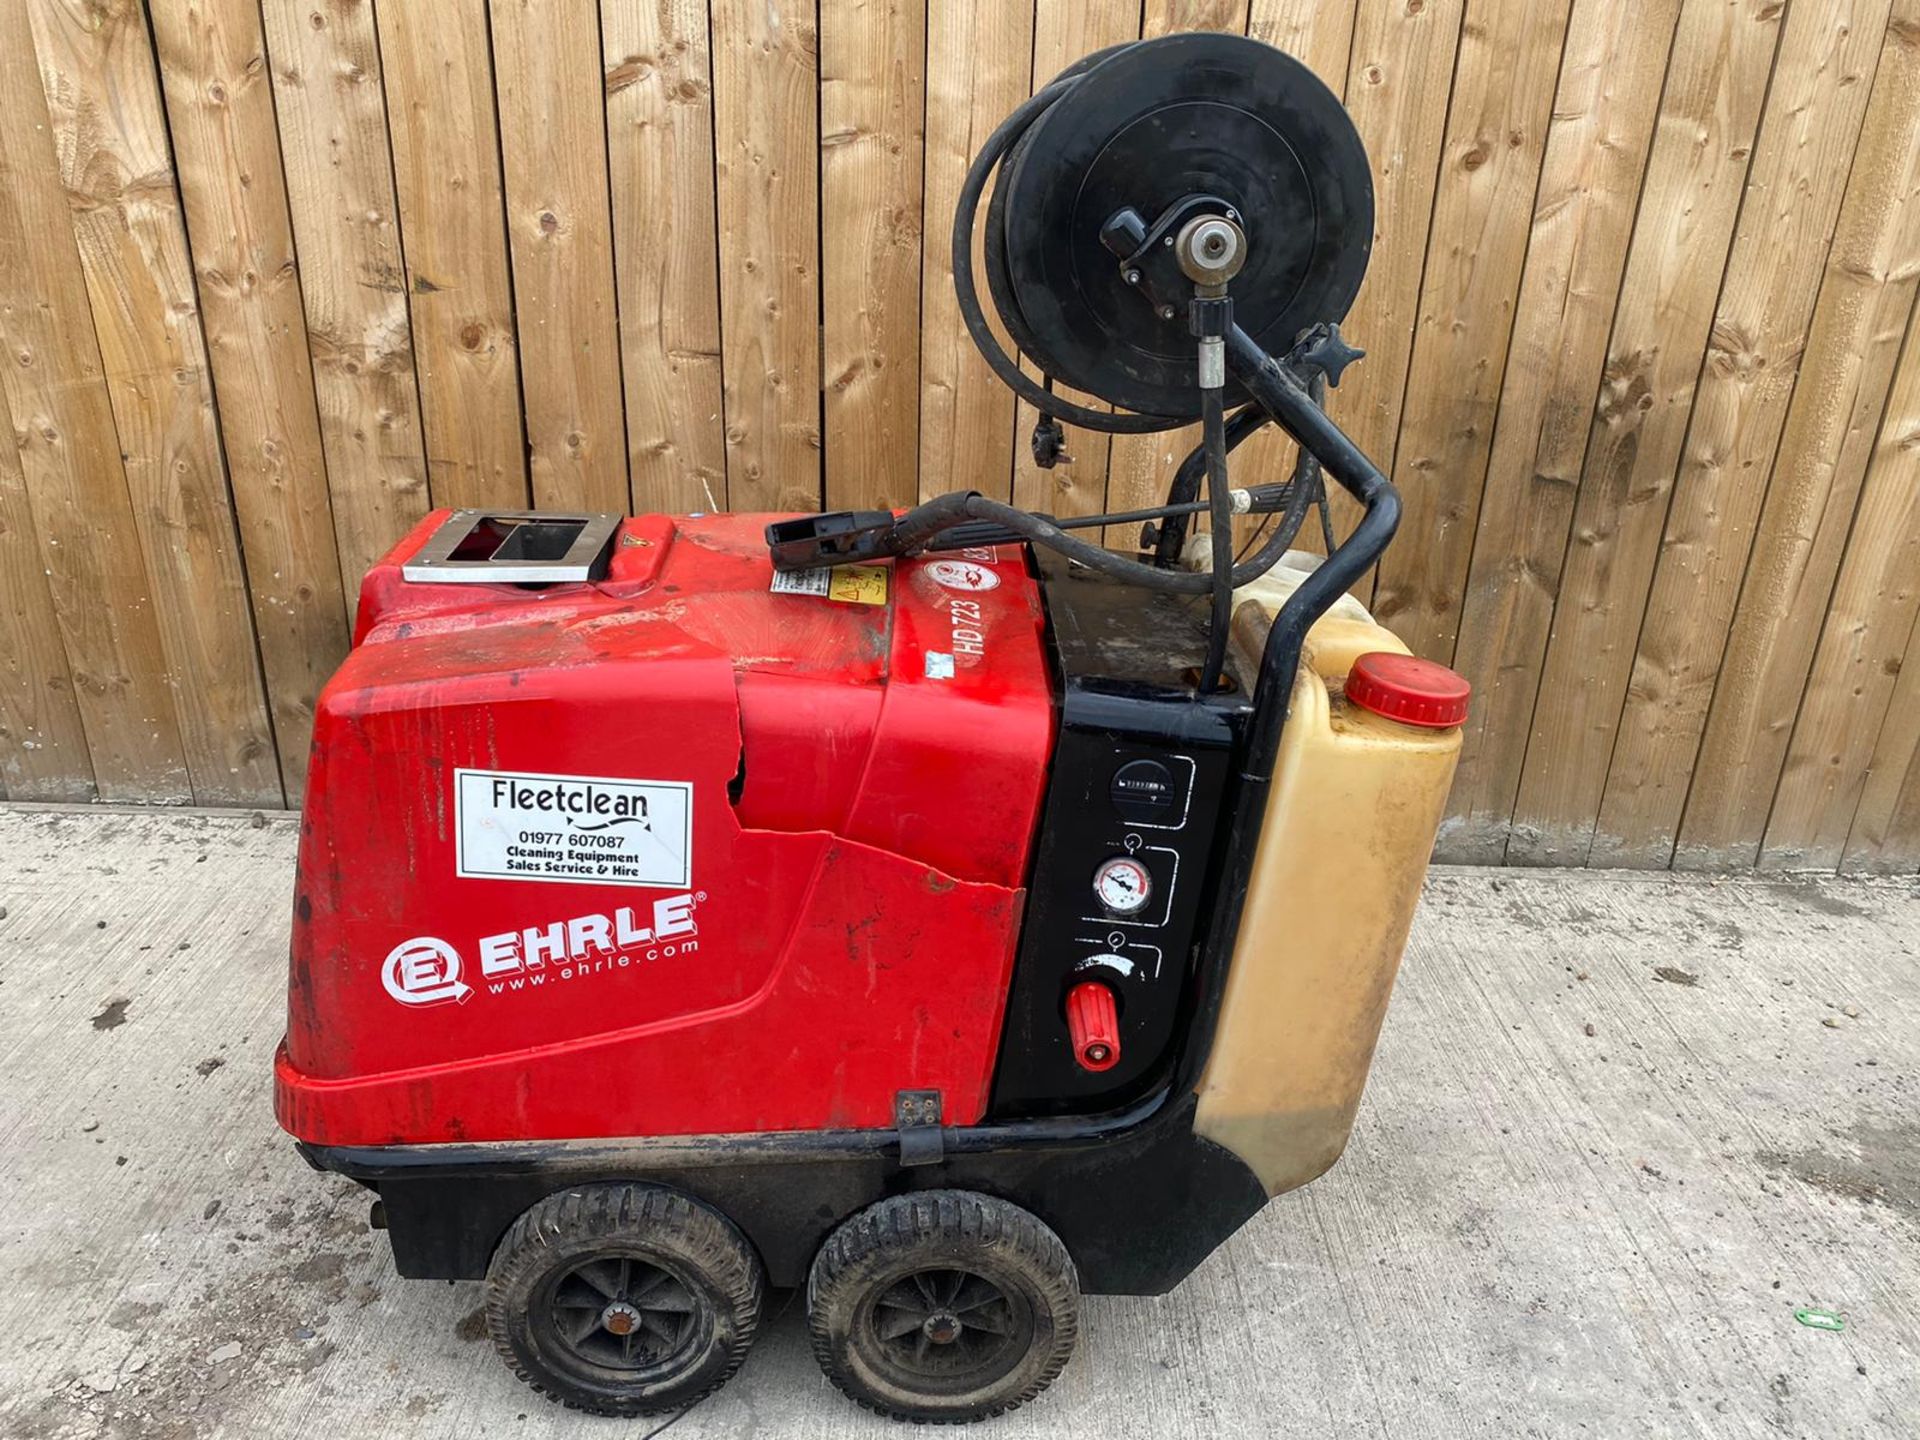 EHRLE 240V DIESEL POWER WASHER HOT AND COLD HOSE AND LANCE.LOCATION NORTH YORKSHIRE.